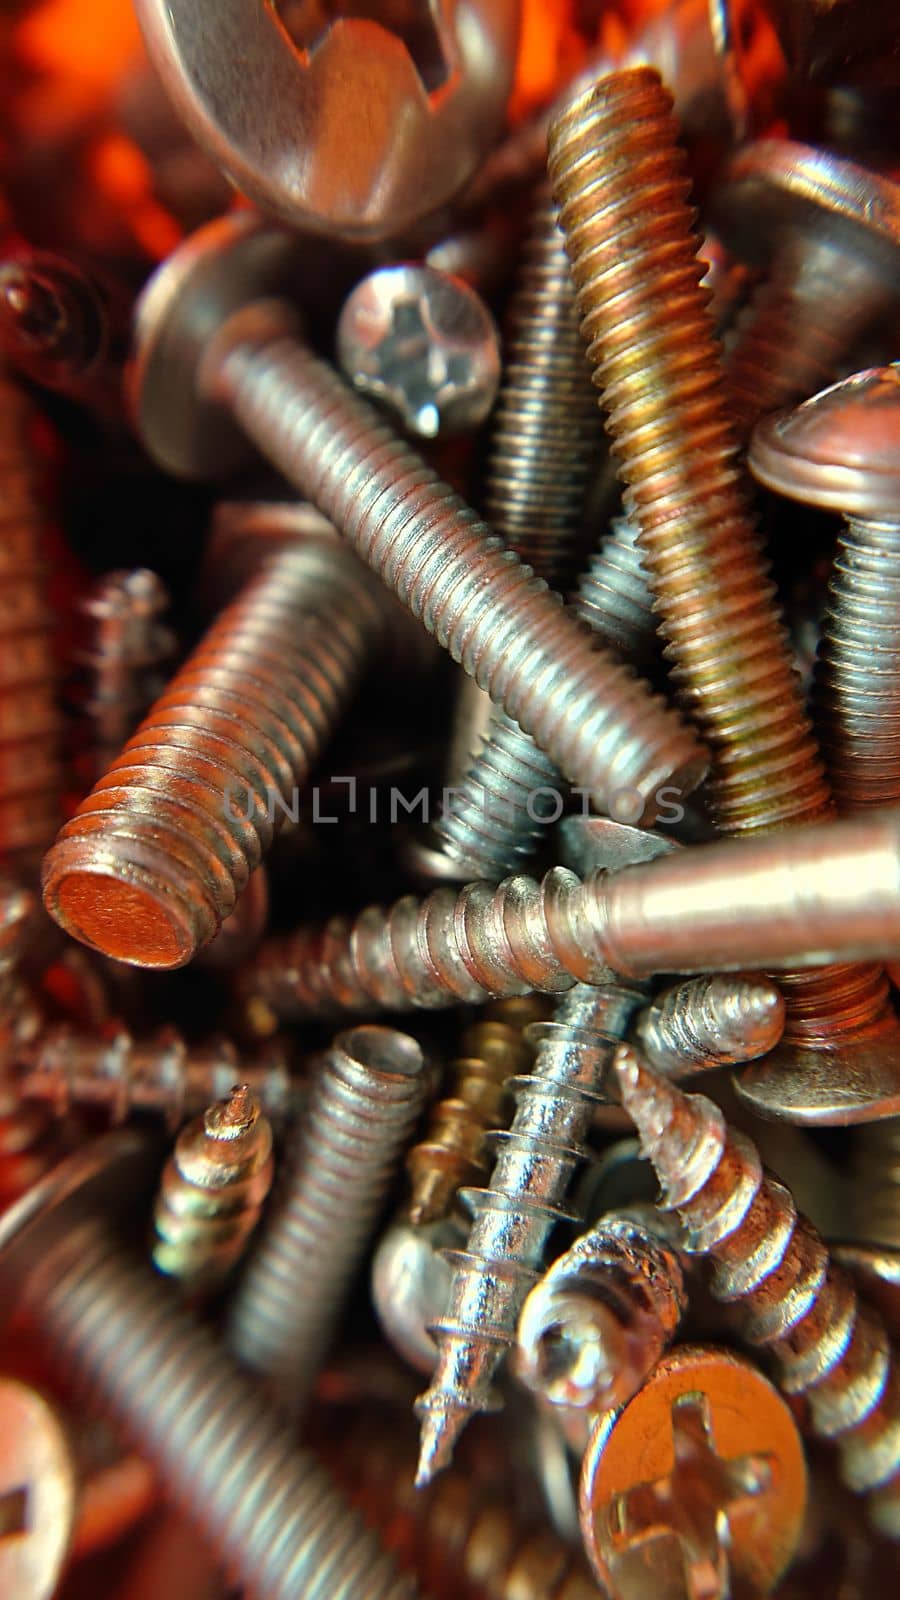 Bolts screws nuts mounting hardware .Macrophotography.Texture or background.Selective focus.